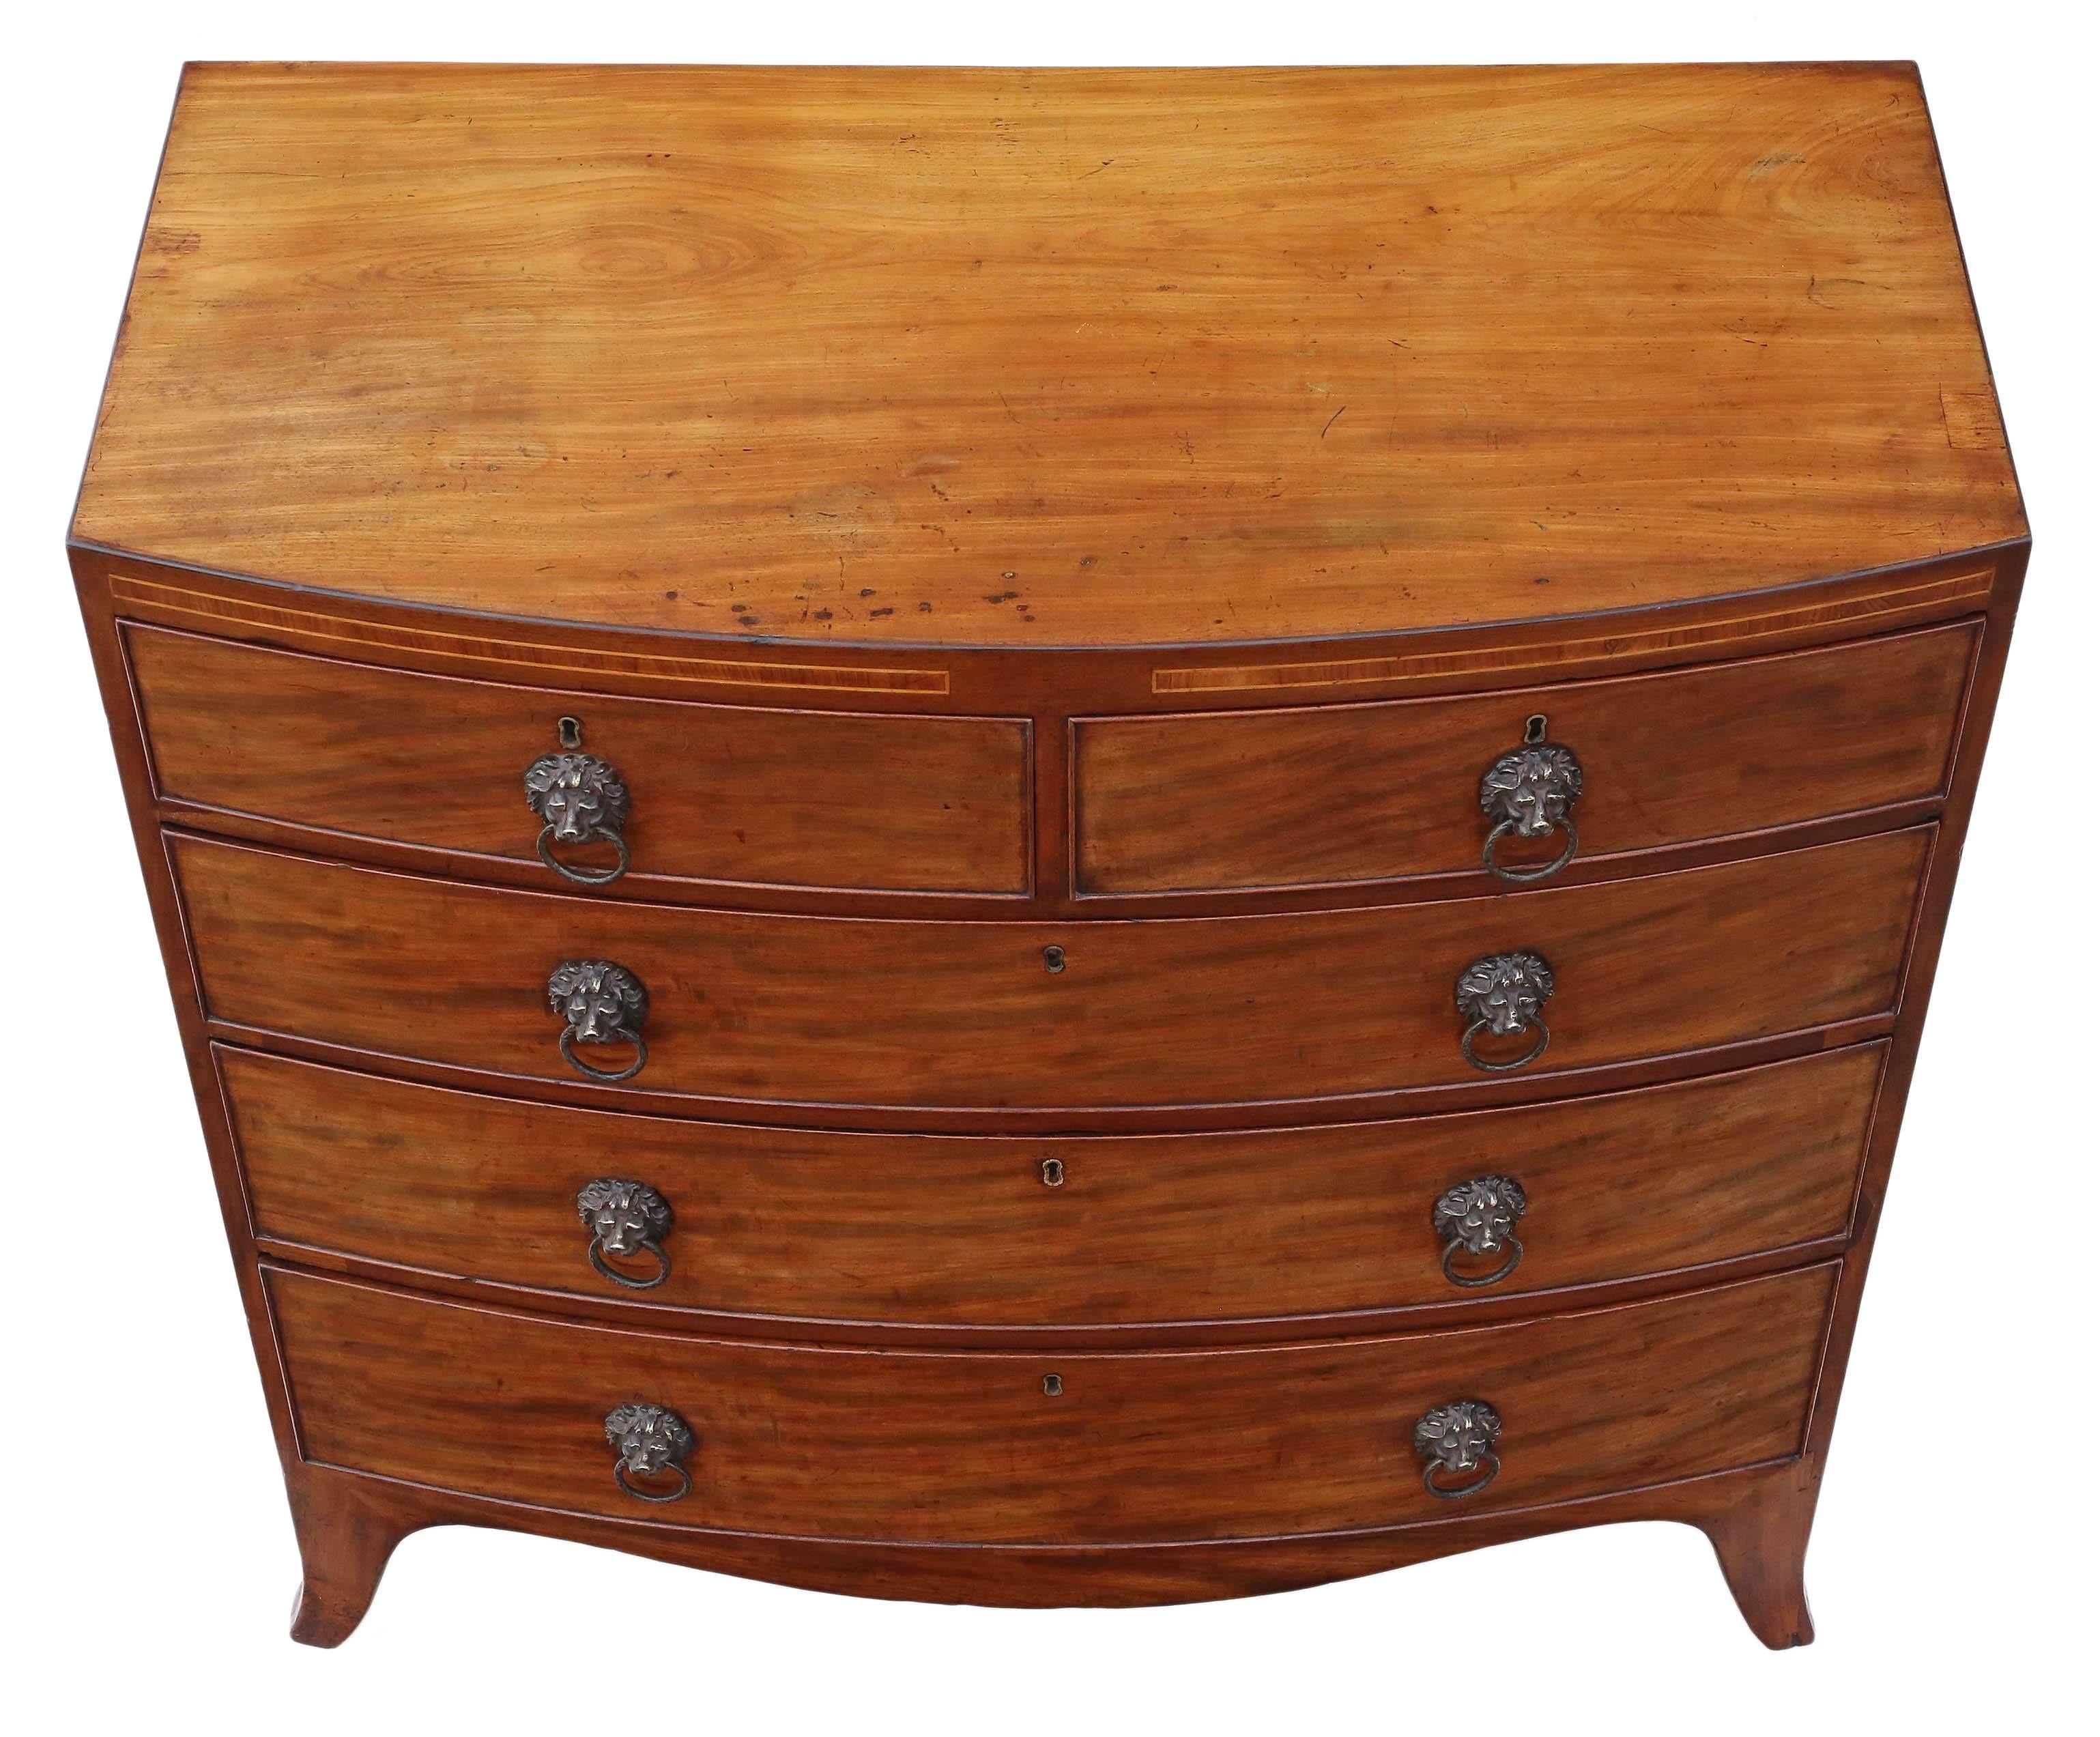 Antique quality Regency bow front flame mahogany chest of drawers, circa 1820.
This is a lovely chest, that is full of age, charm and character, with great tapered bracket feet and caddy top.

Solid, strong and heavy. No woodworm.

No loose